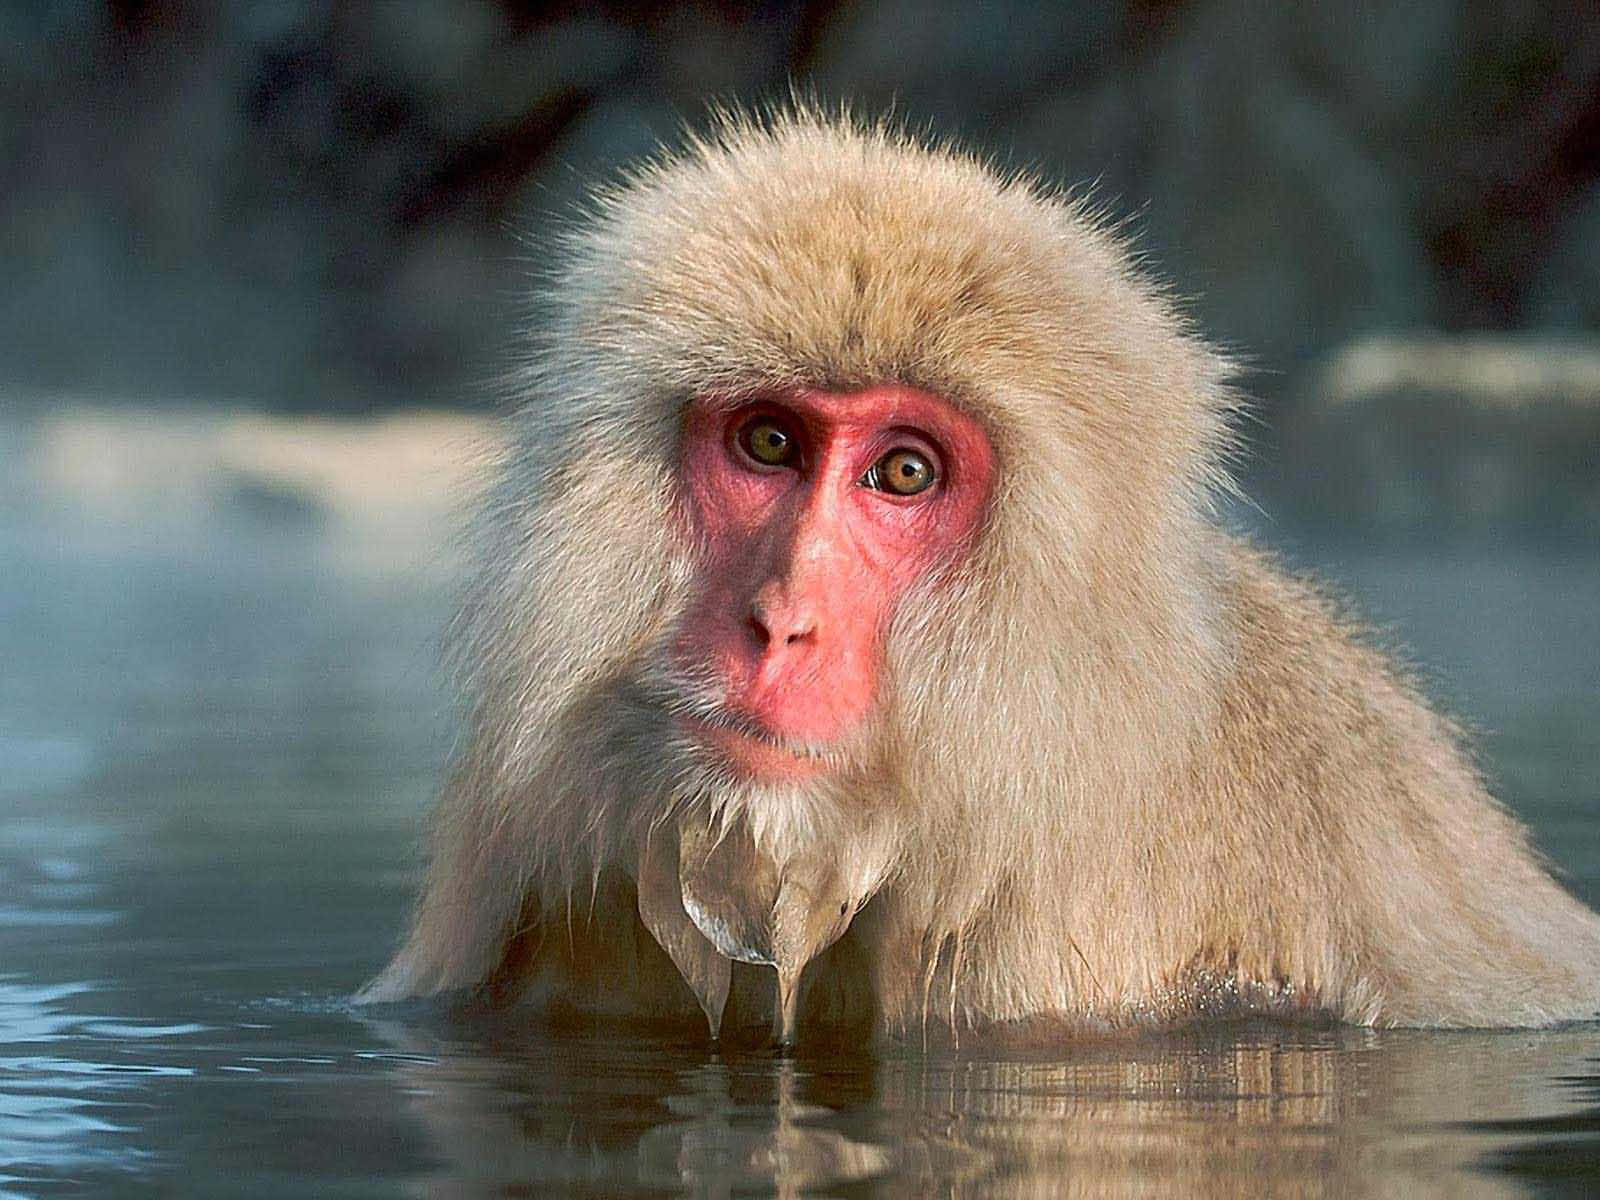 A Snow Monkey Is Swimming In The Water